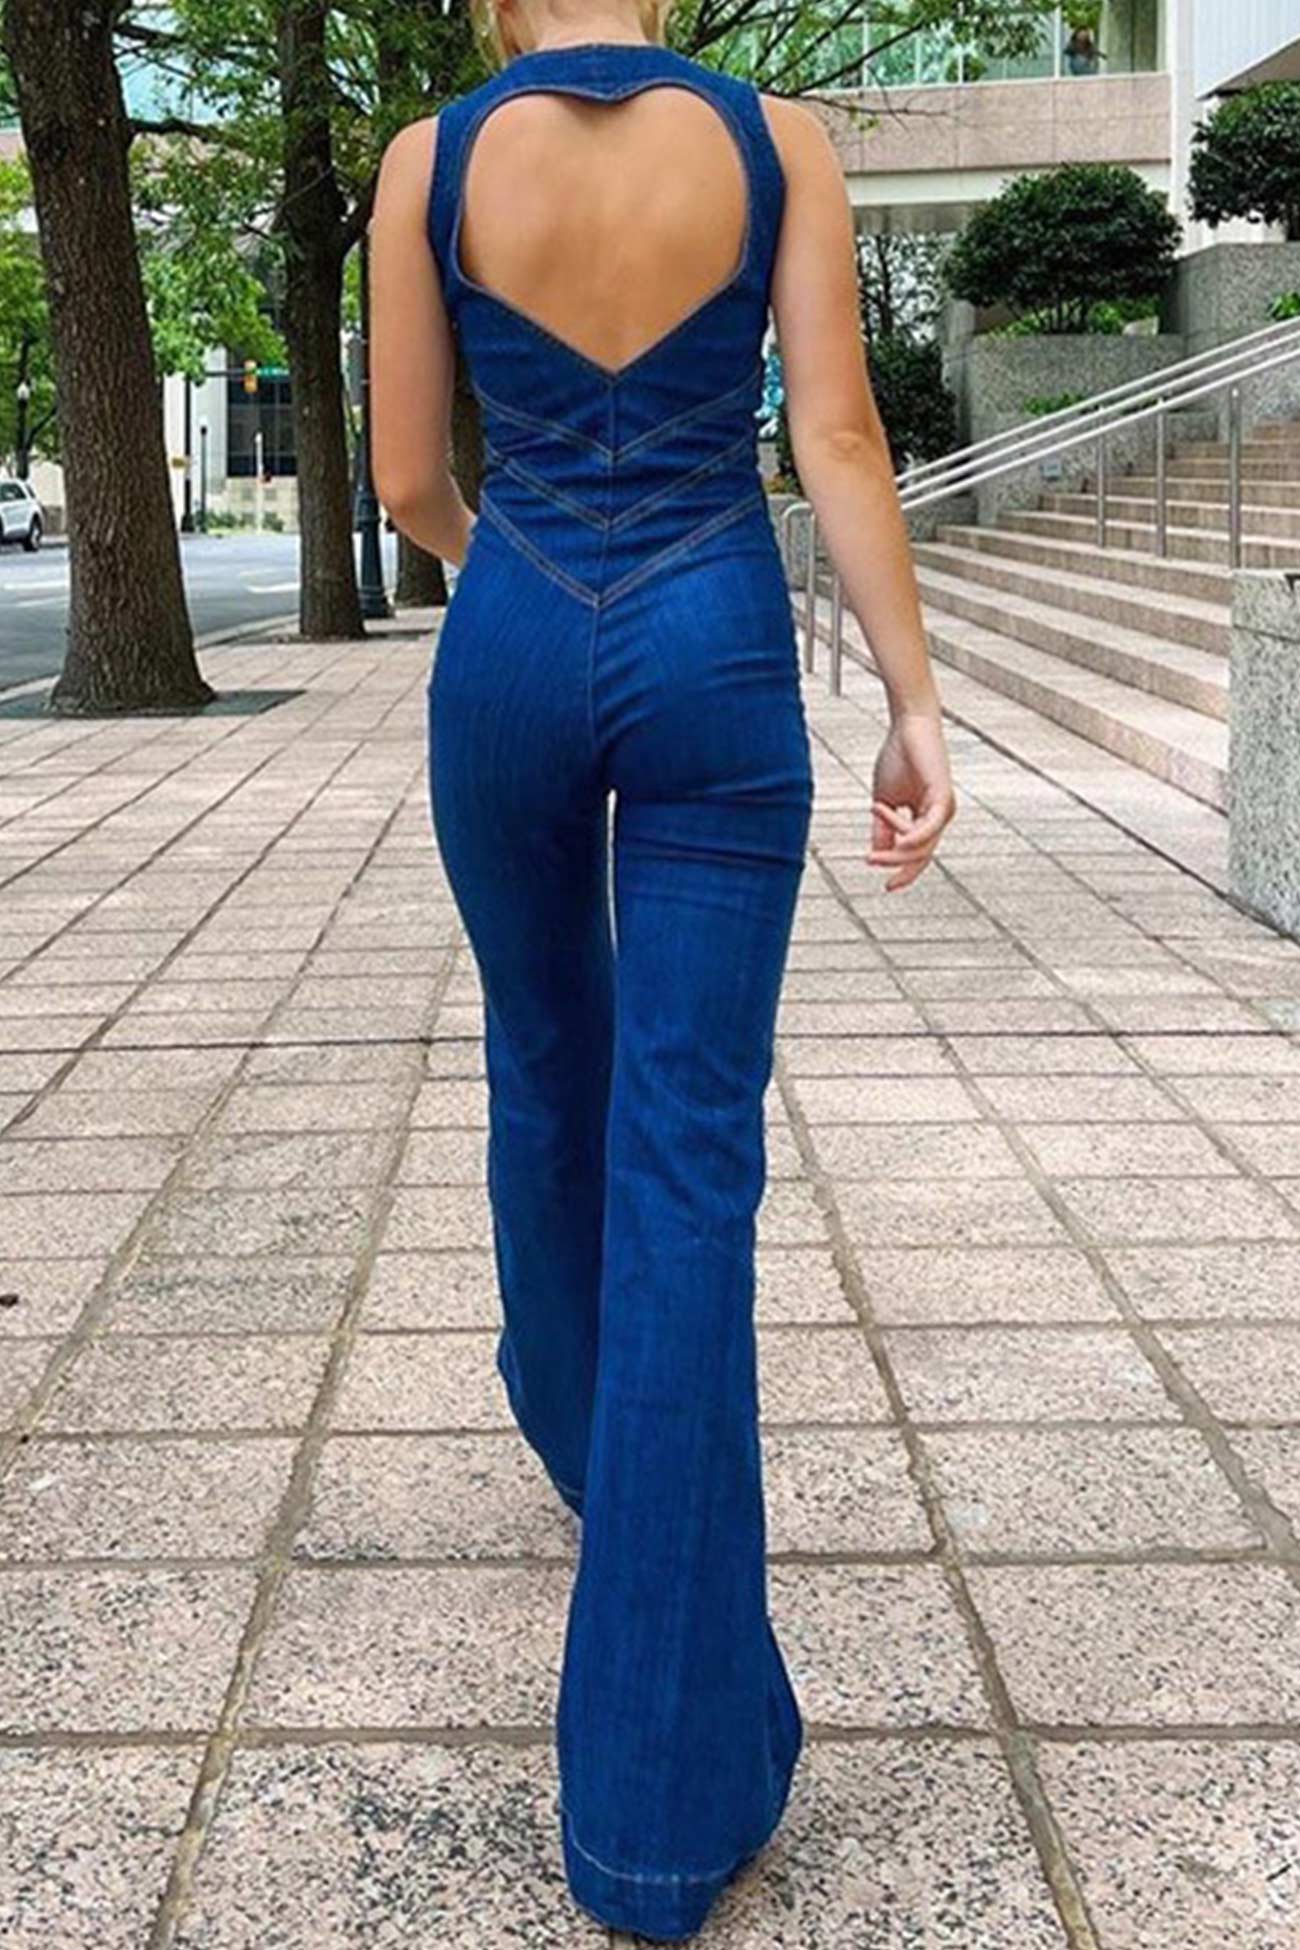 Denim Jumpsuit for Women Summer Casual Short Sleeve V Neck Cut Out Sexy Flared  Romper Jumpsuits 